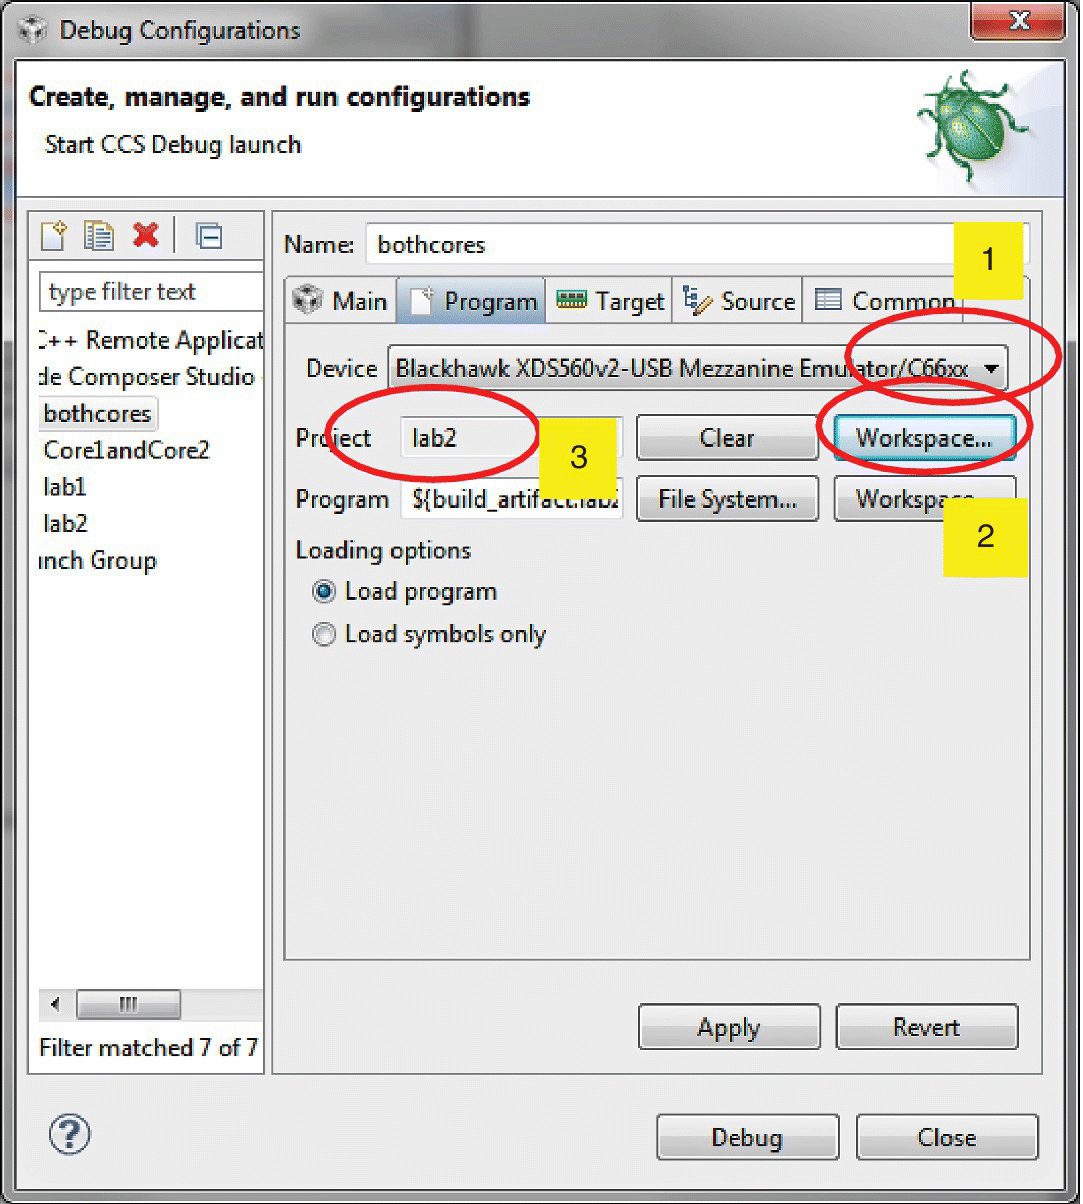 Debug Configurations window in setting for the second project displaying the Program tab and by clicking the dropdown arrow under Device, and selecting lab2 and Workspace depicted by ellipse under Project.